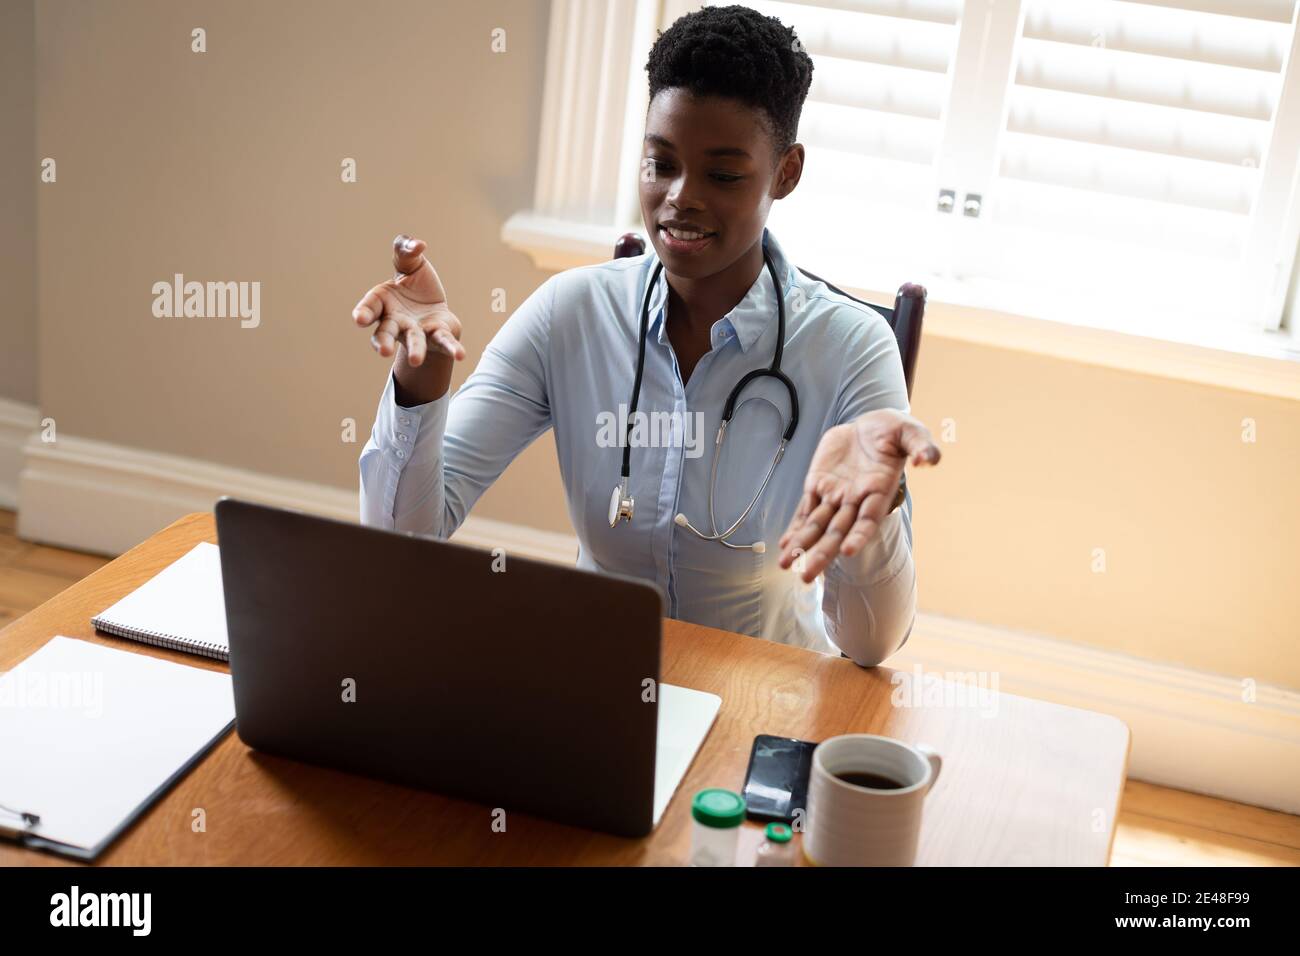 African american female doctor making video consultation call using laptop Stock Photo